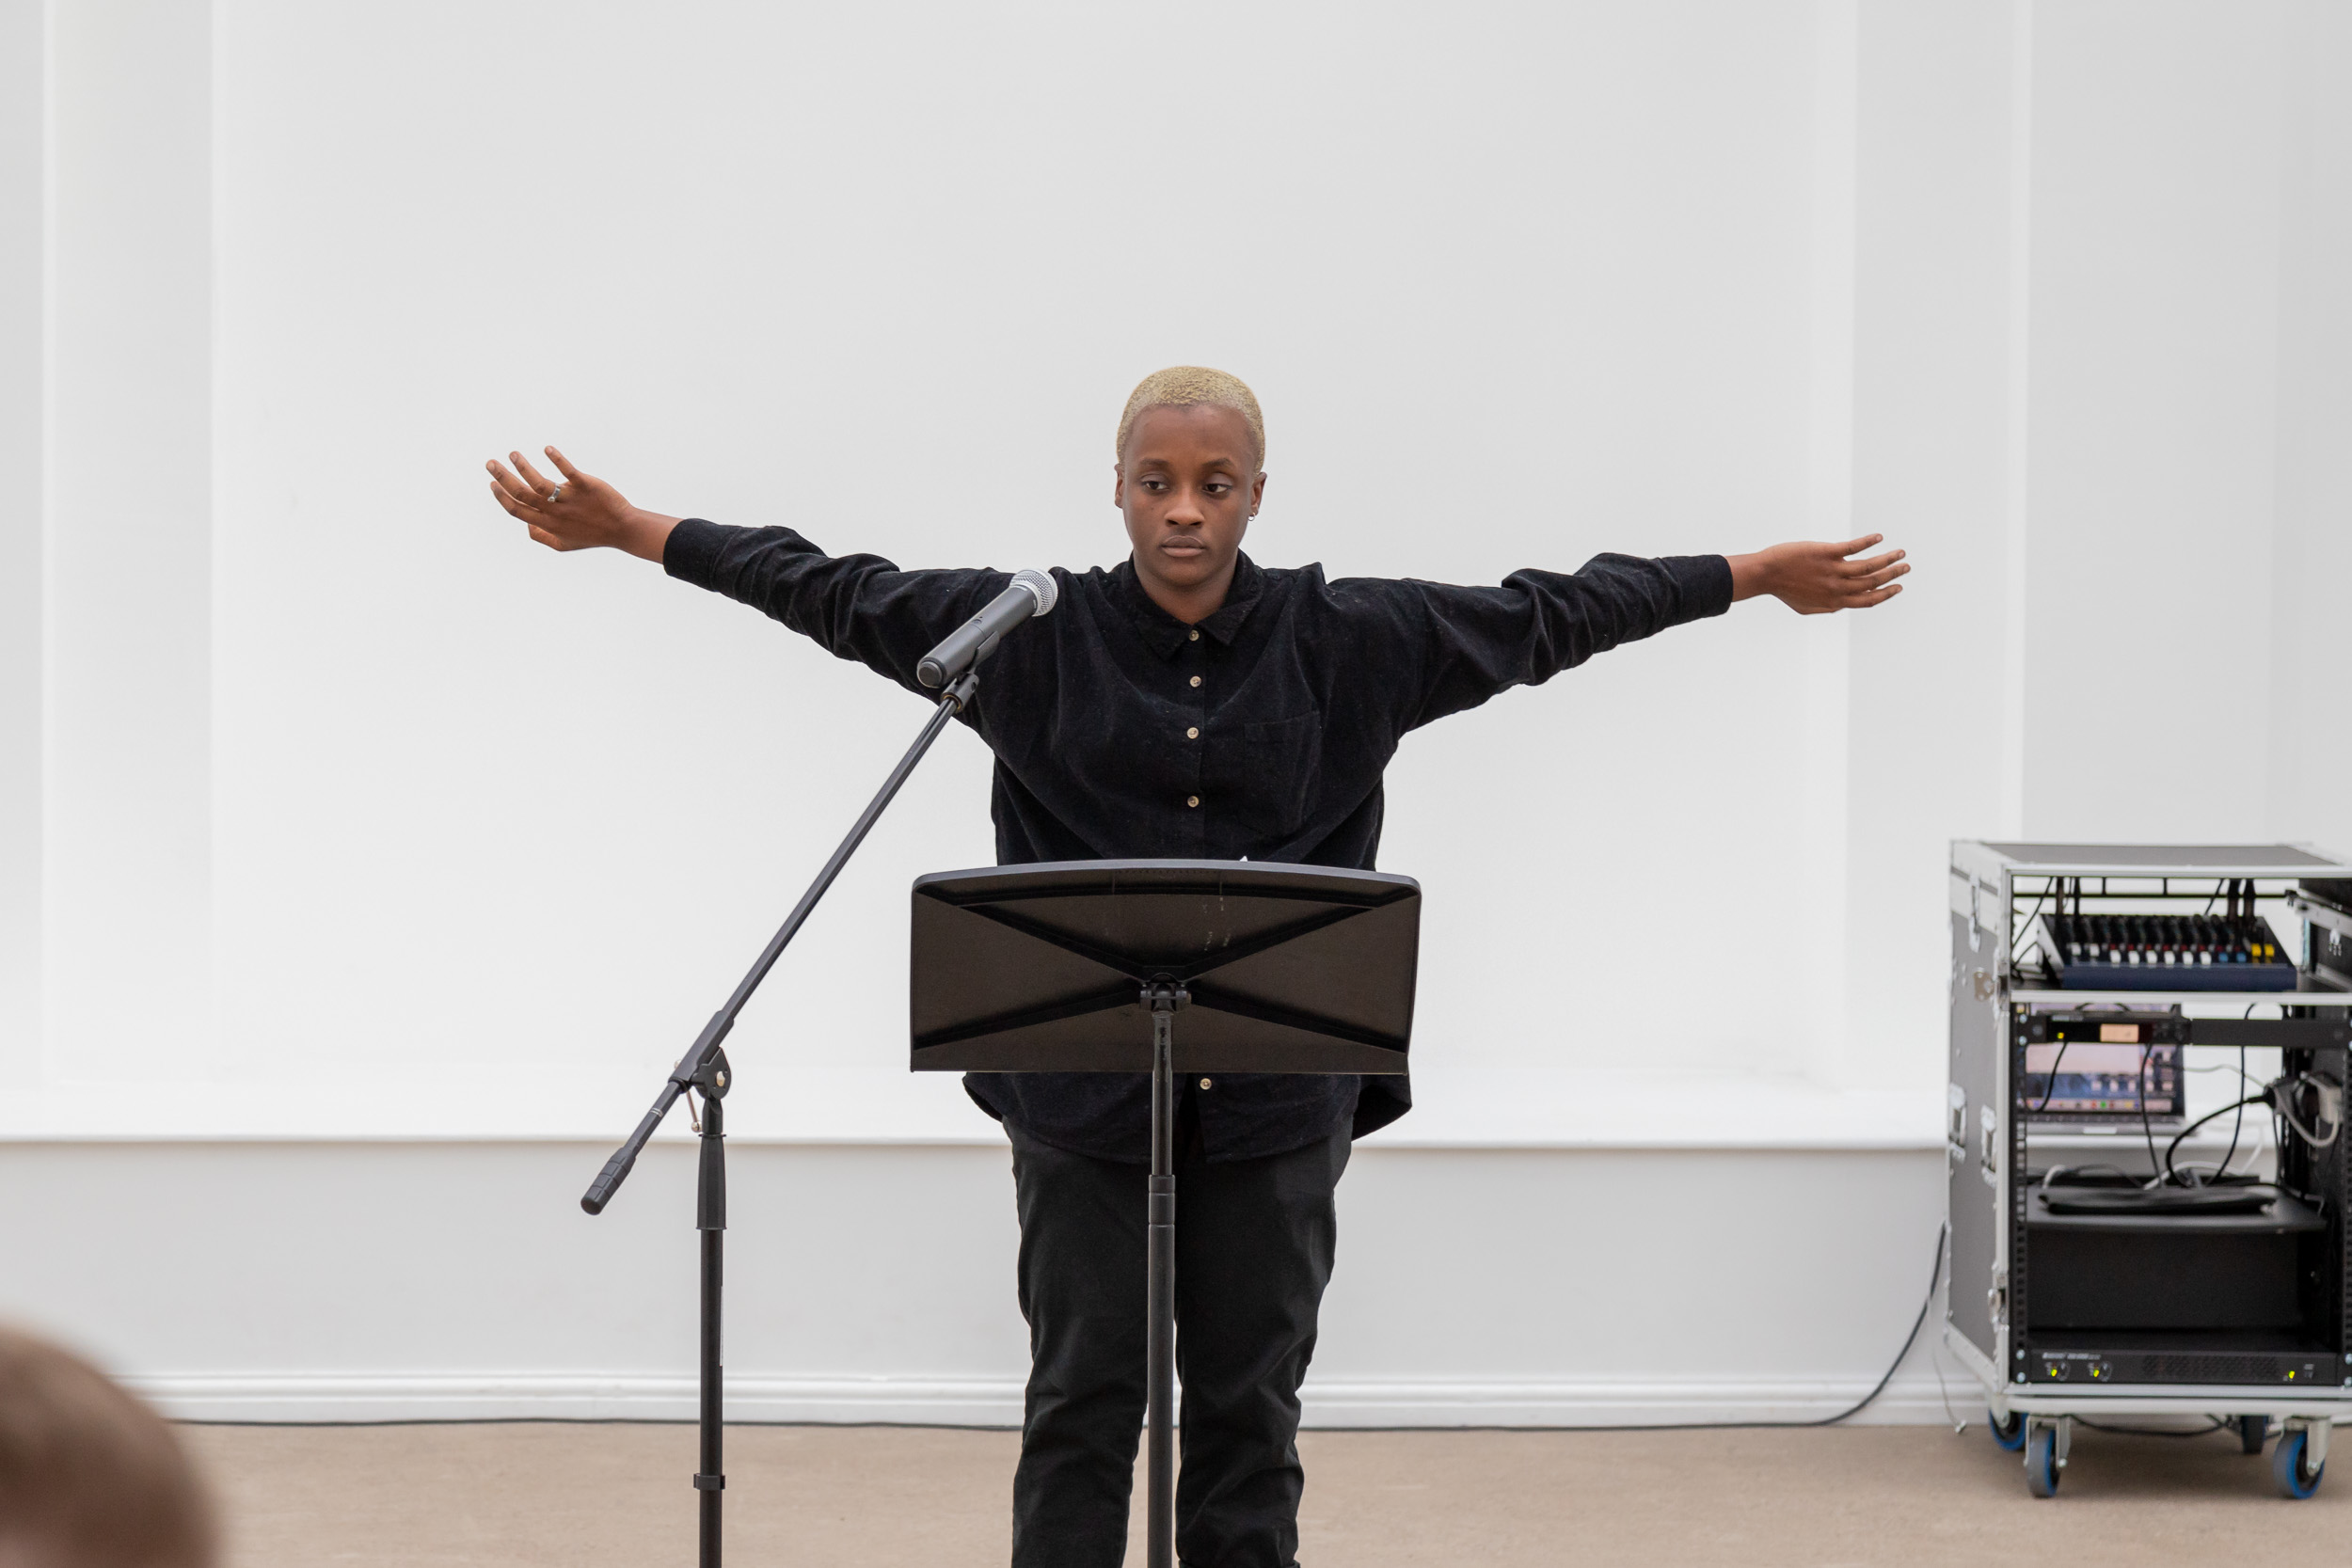 A black artist or performer stands at a microphone and music stand, their arms are flung wide. The background is white.